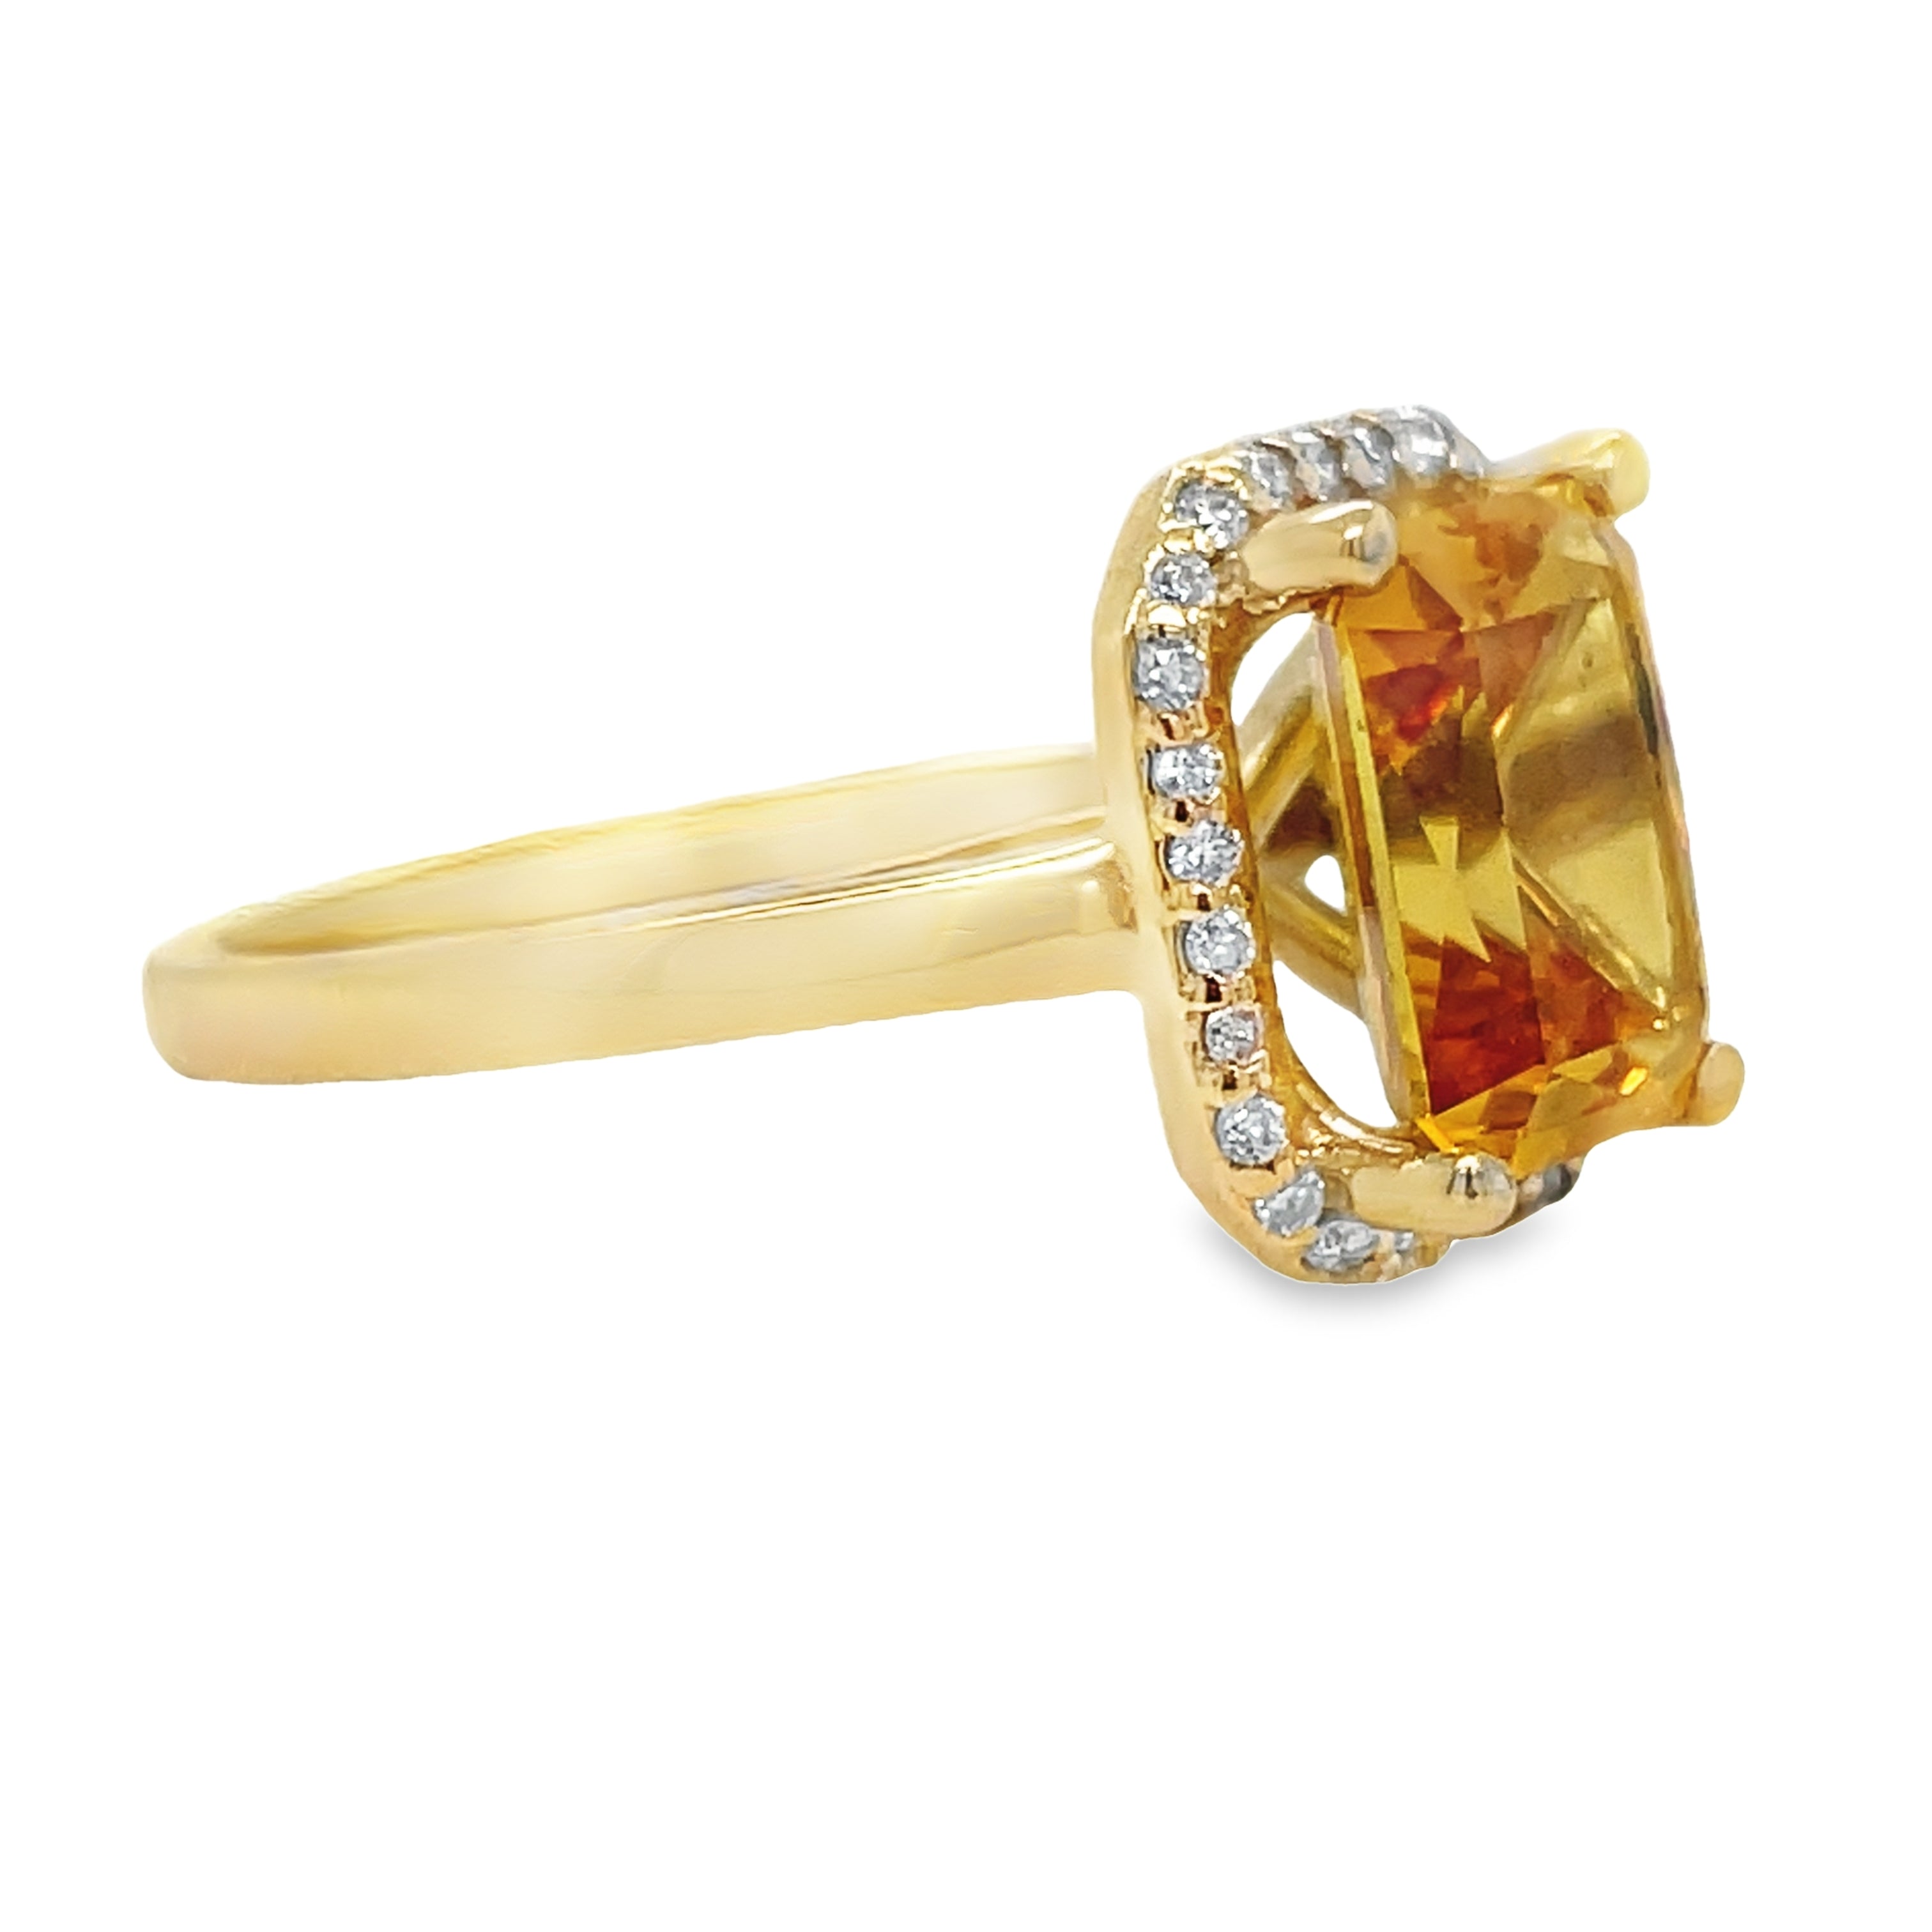 Elegant cathedral-style ring crafted from 14k yellow gold with a square citrine and diamond bezel, featuring 0.25 cts of round diamonds. Perfect for adding a touch of sophistication to any outfit.